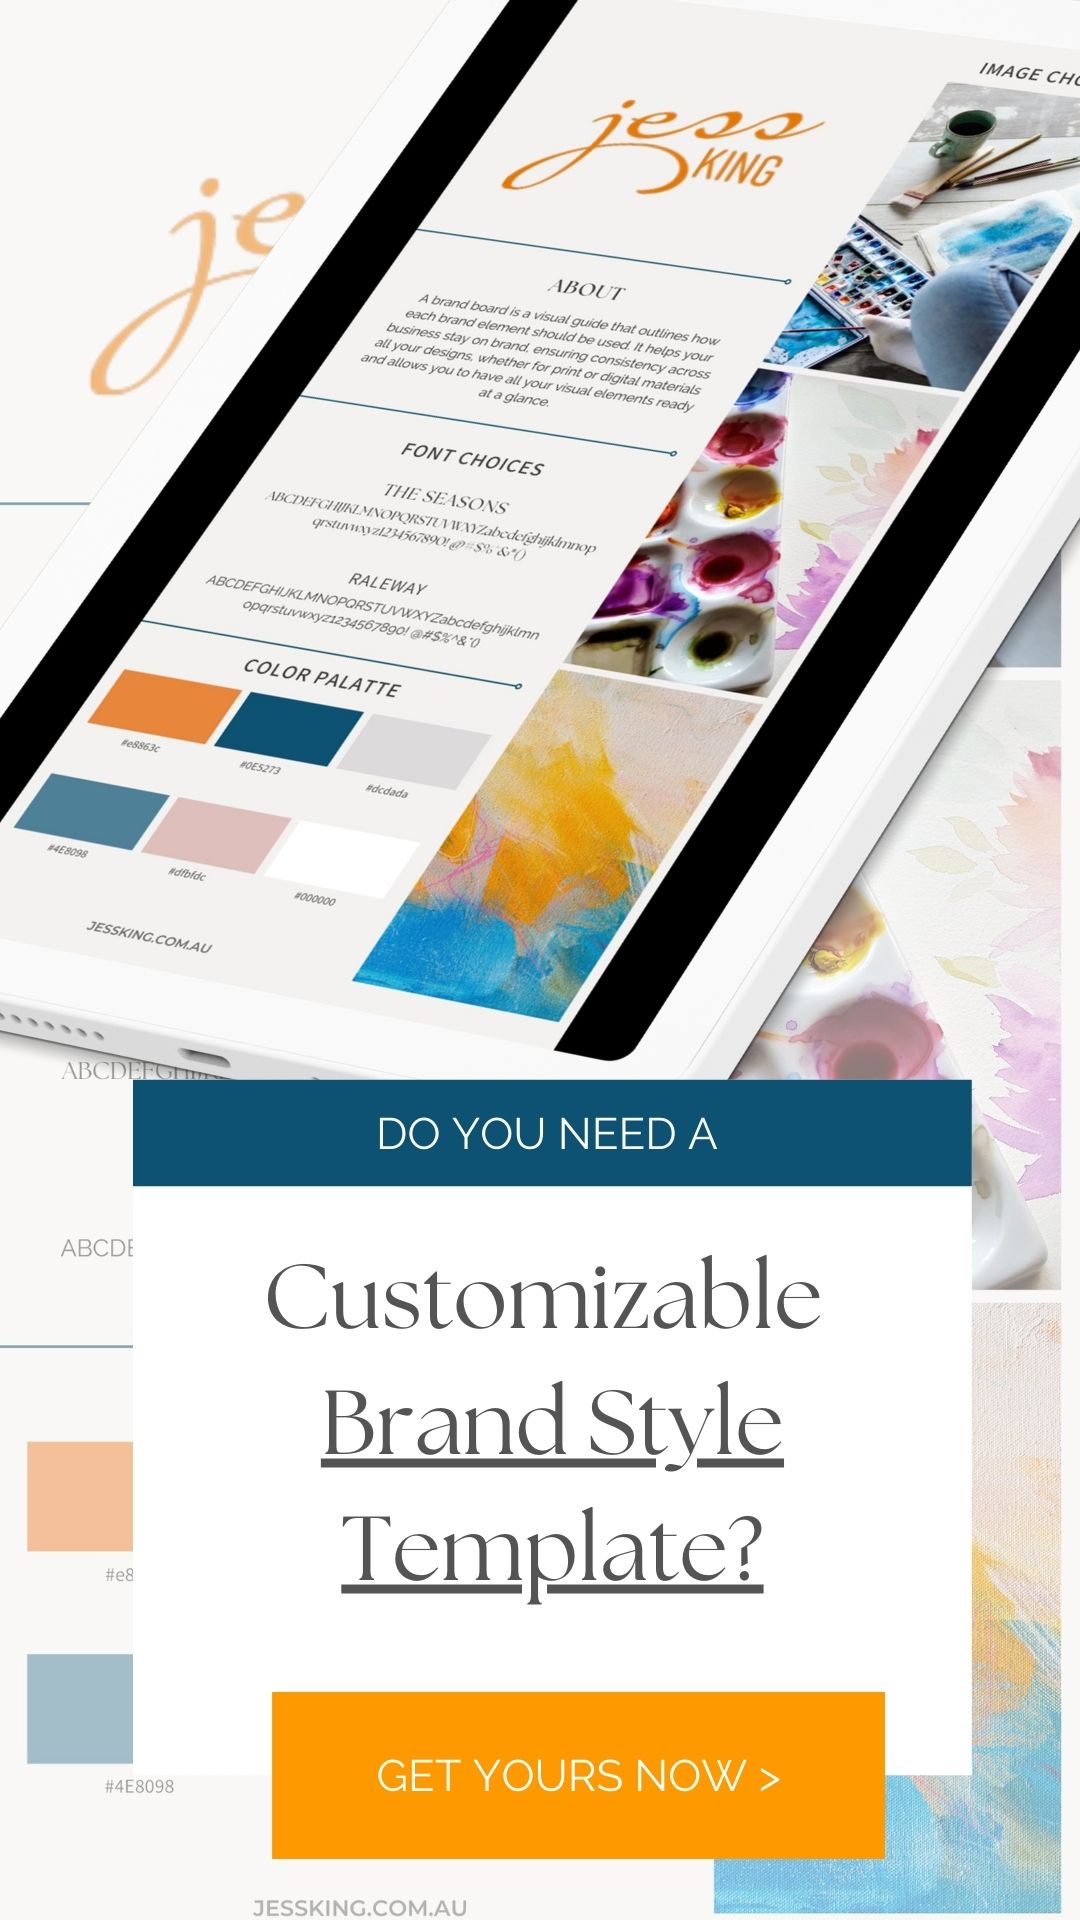 Customisable Brand template by Jess King